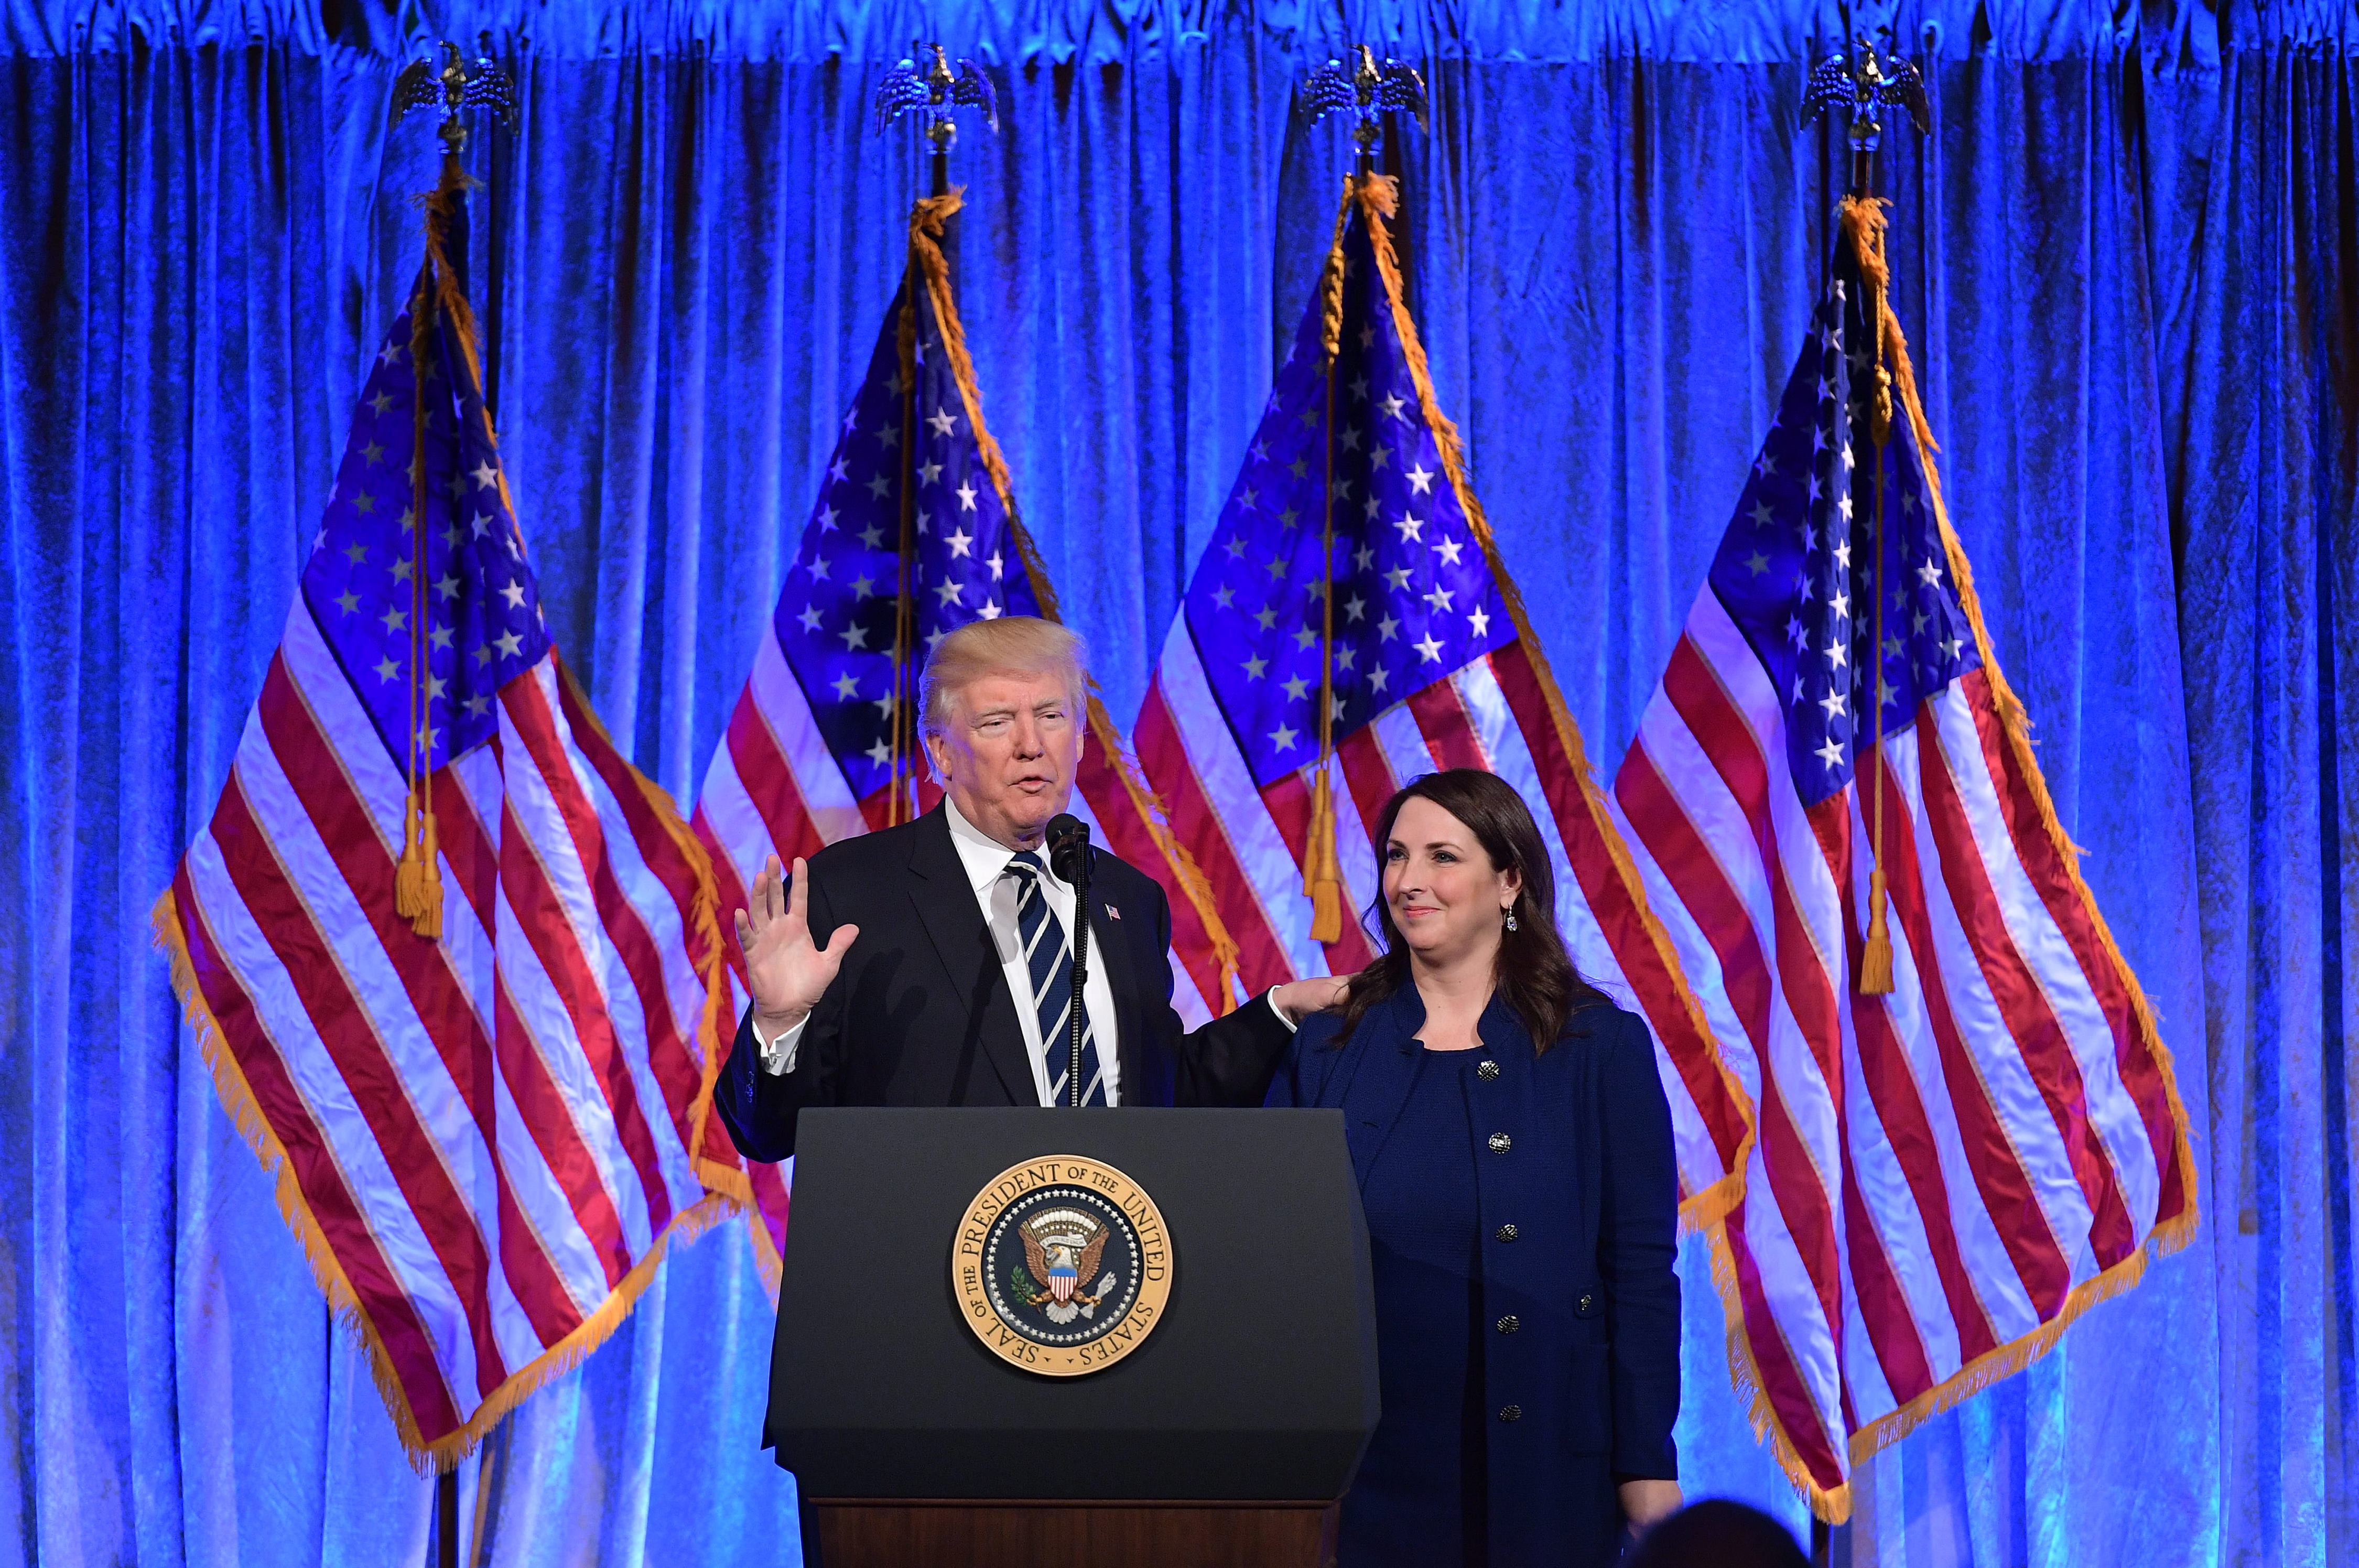 US President Donald Trump speaks after his introduction by RNC Chairwoman Ronna Romney McDaniel at a fundraising breakfast in a restaurant in New York, New York on December 2, 2017. (MANDEL NGAN/AFP via Getty Images)